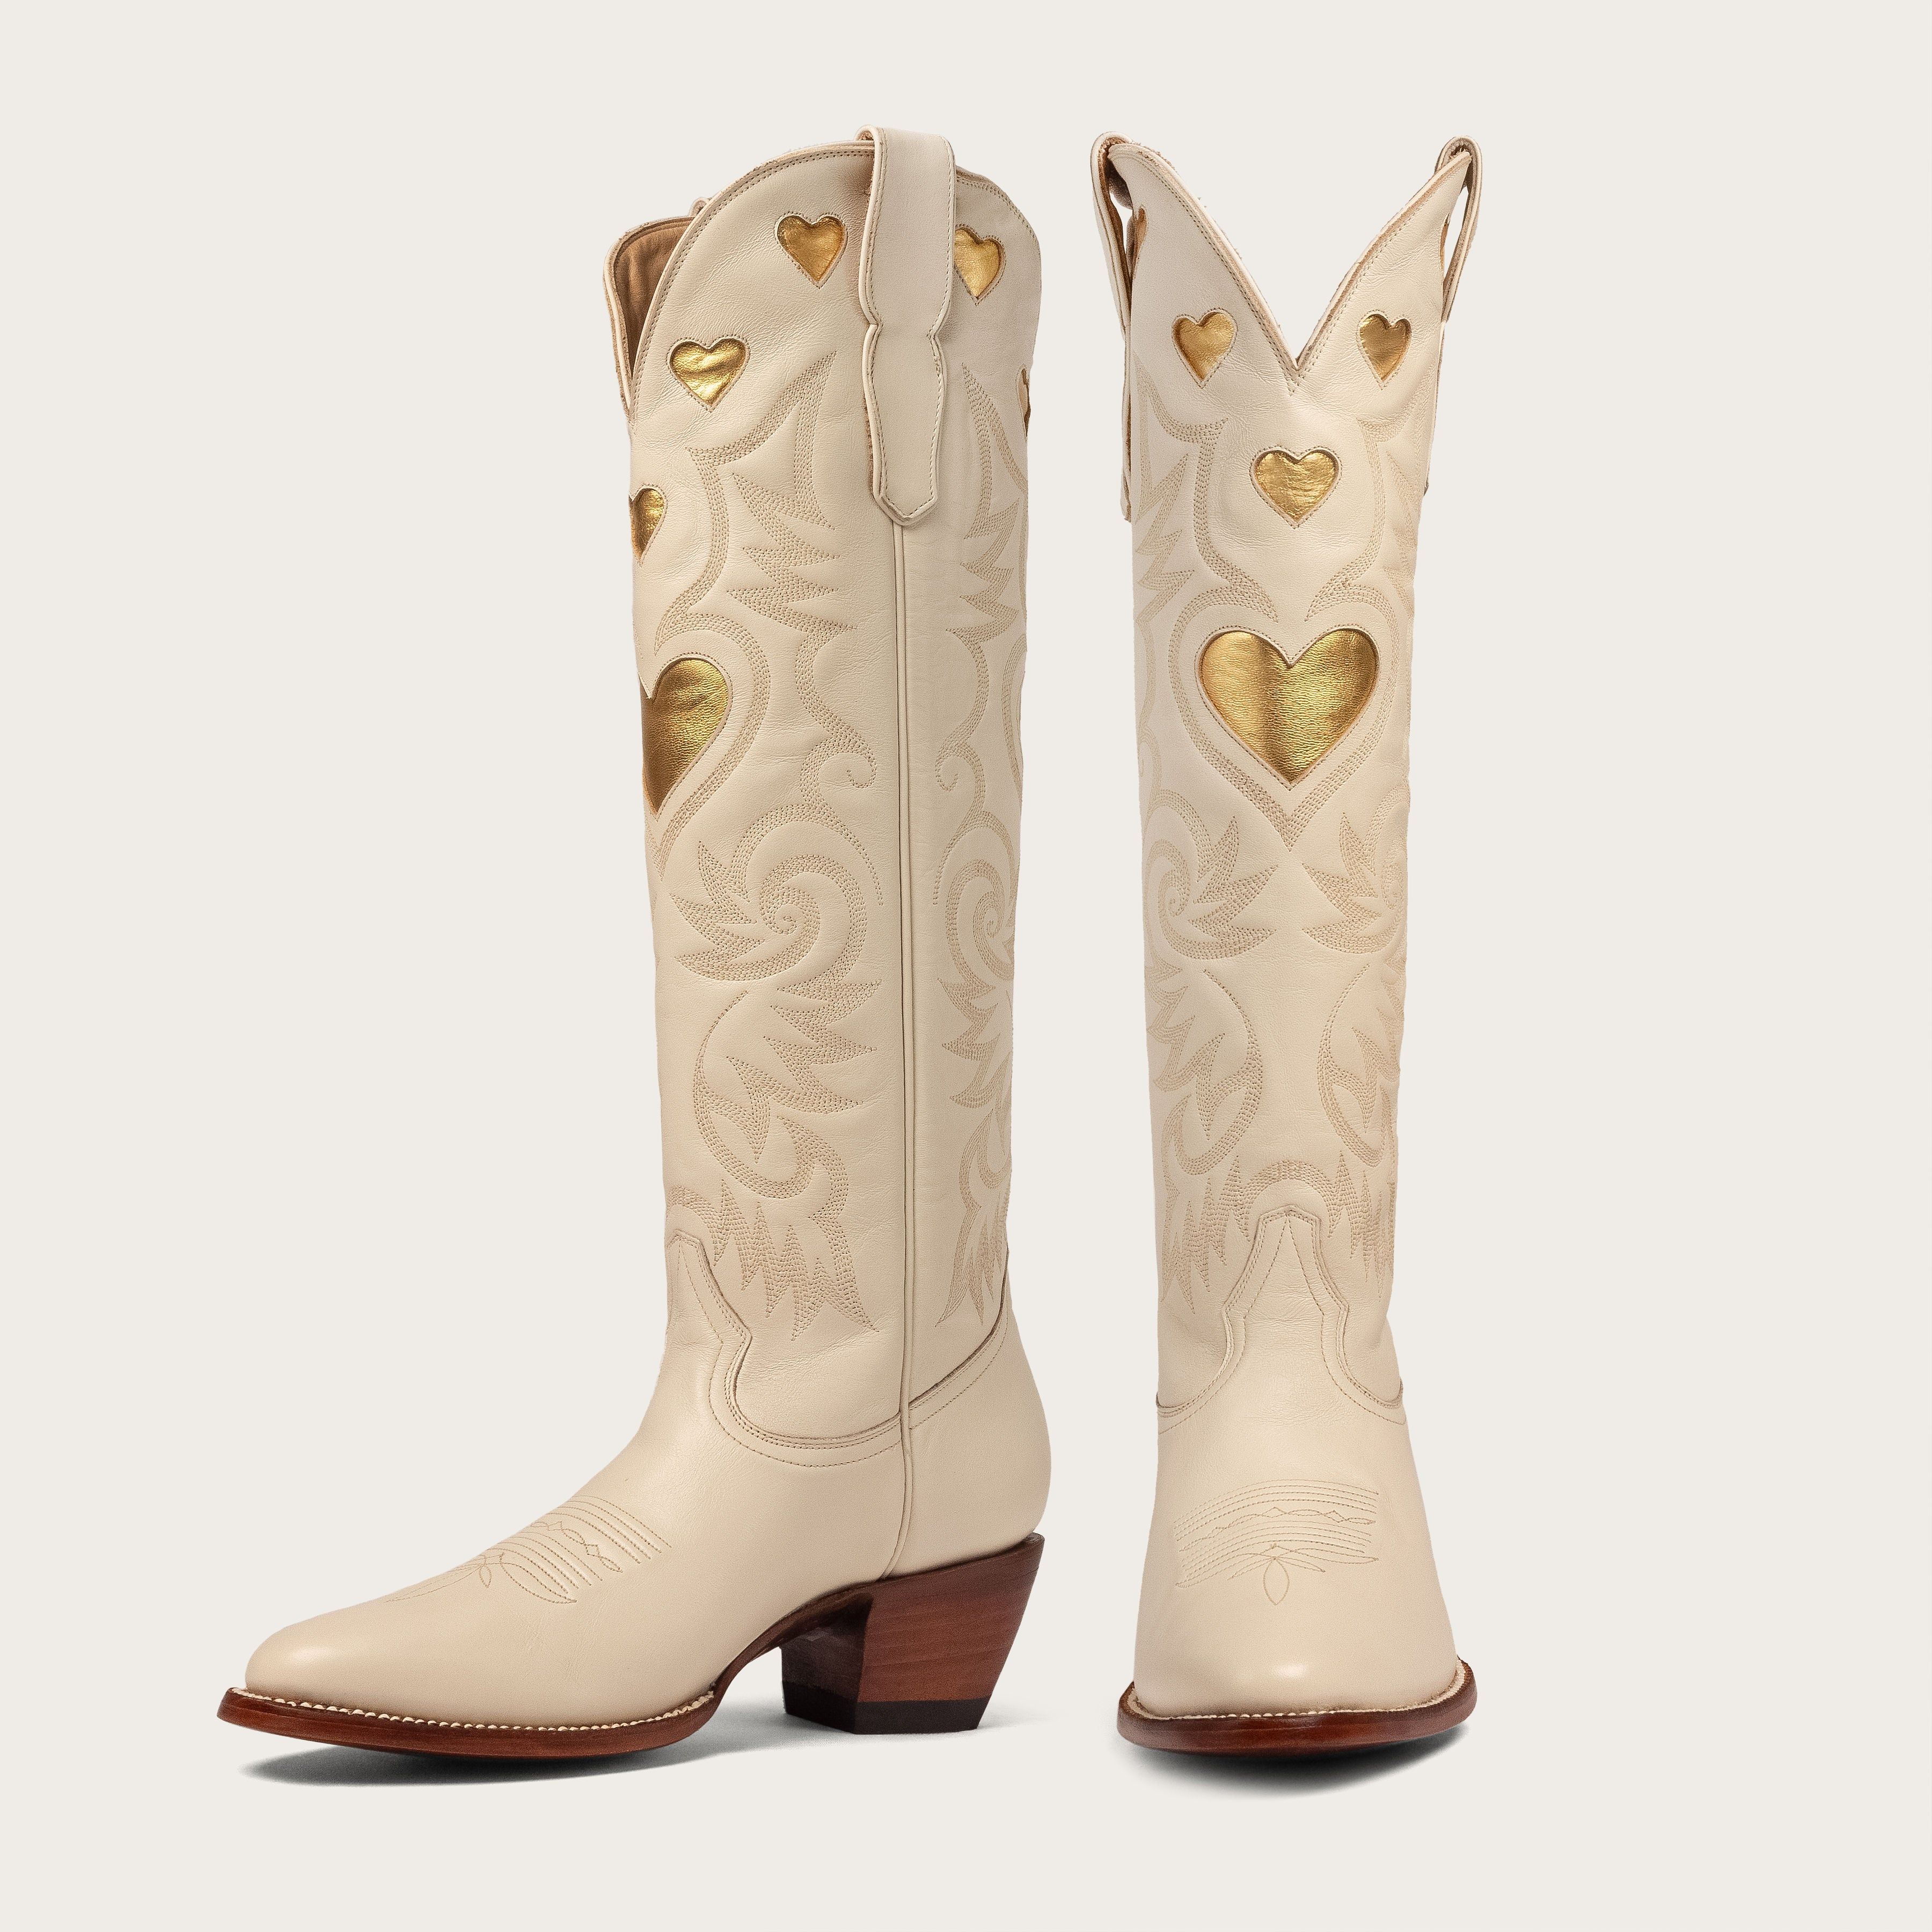 Bone & Gold Heart Boot Limited Edition | CITY Boots